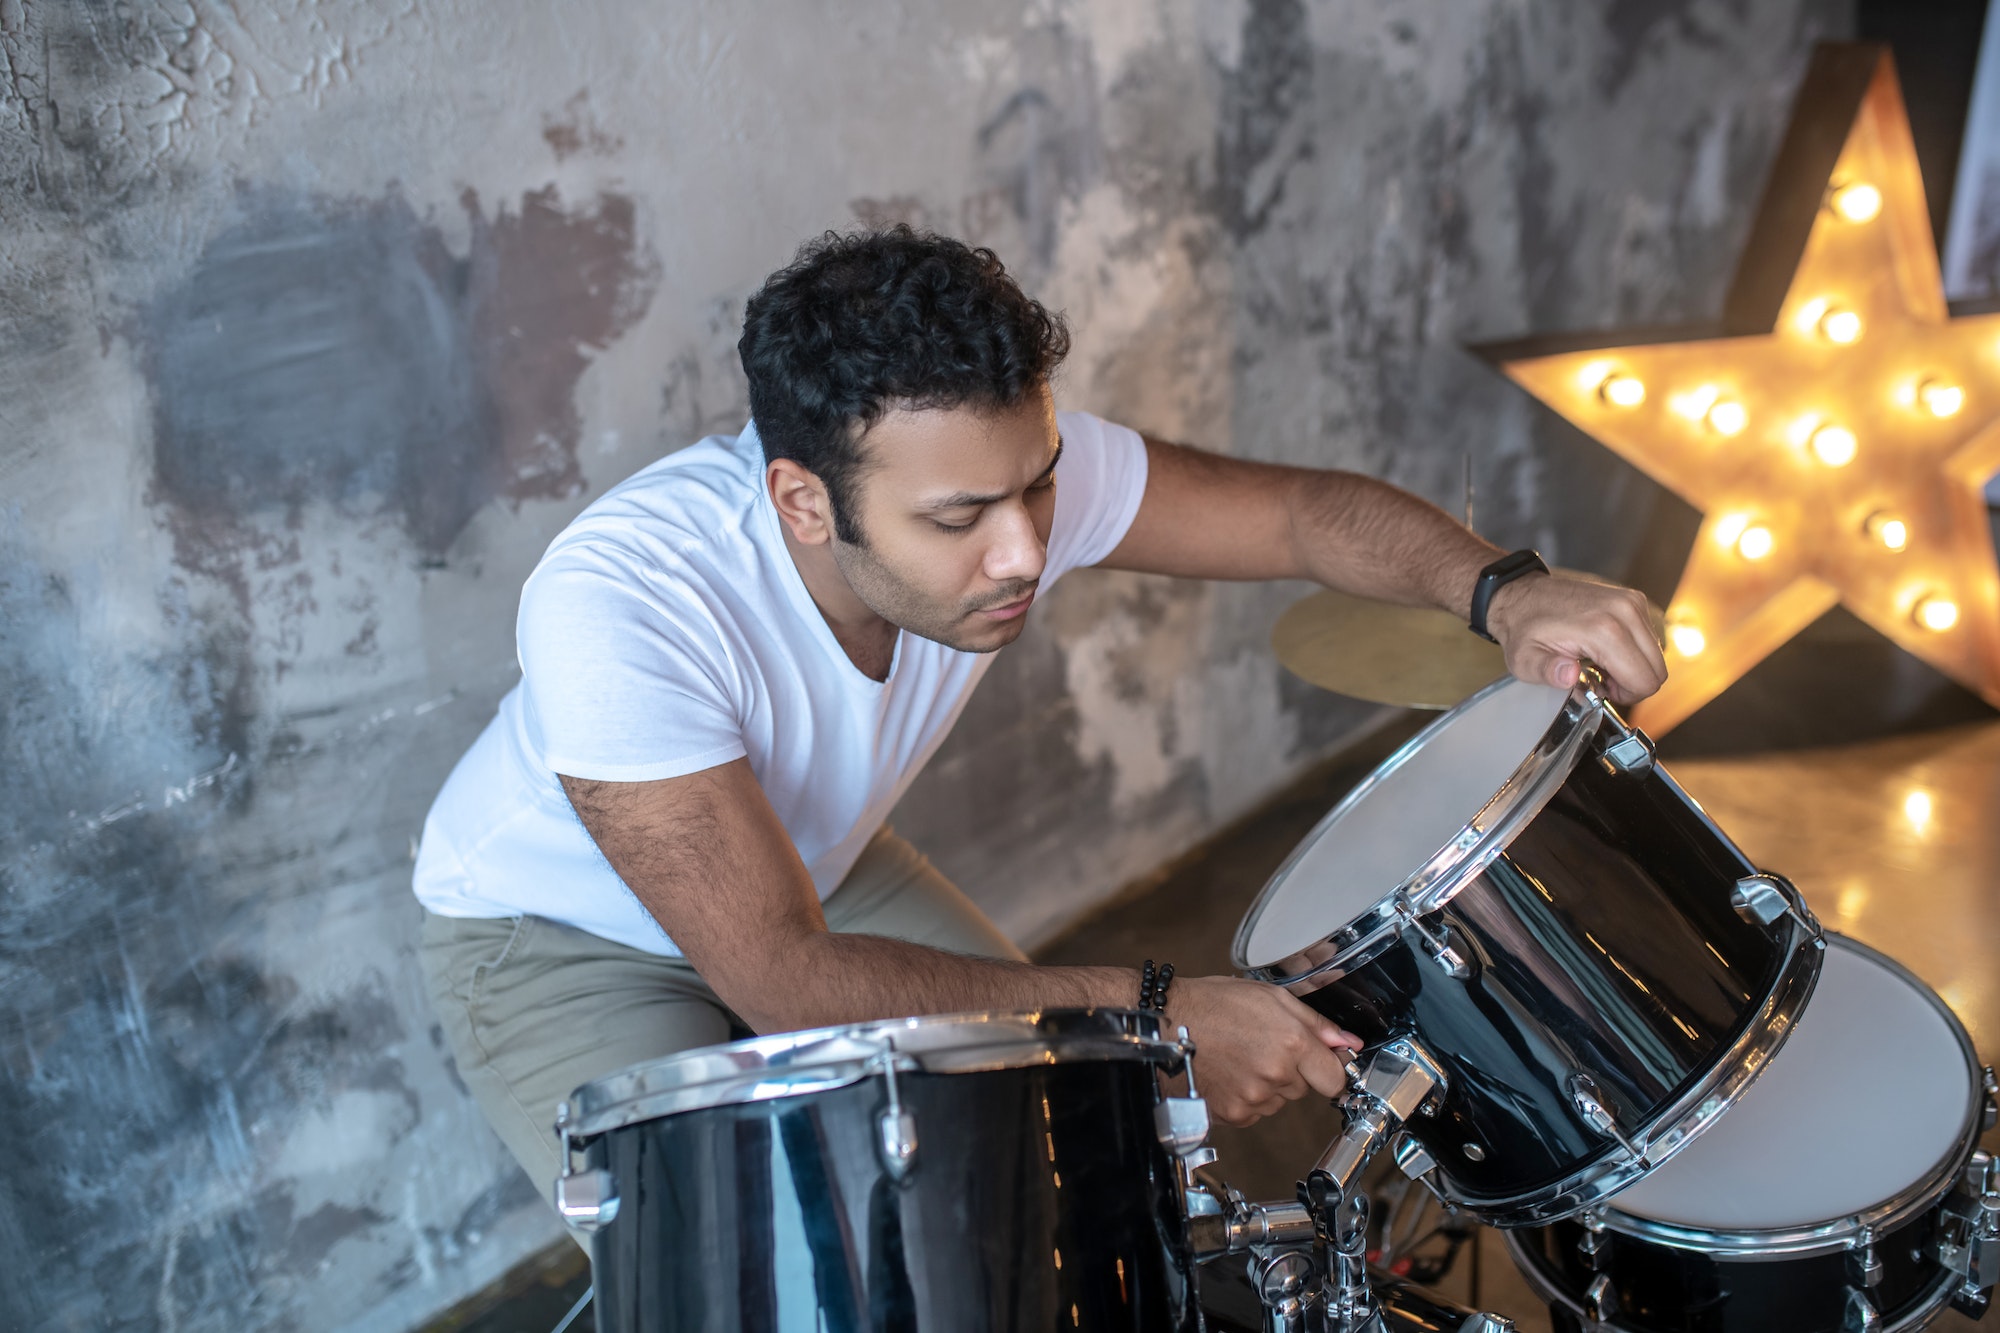 Dark-haired young man in a white tshirt standing near the drums